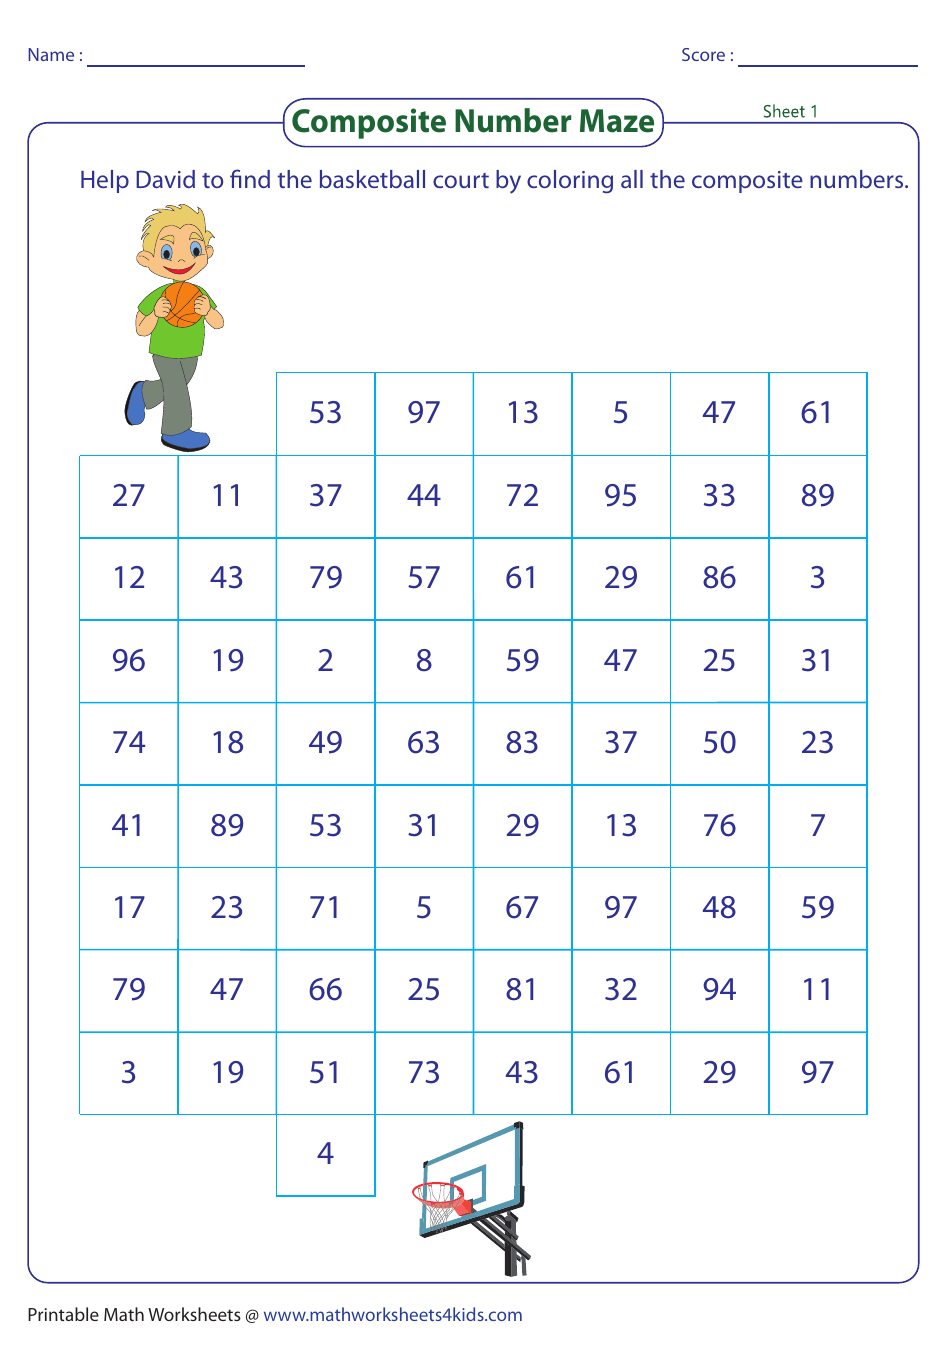 composite number maze worksheet with answer key download